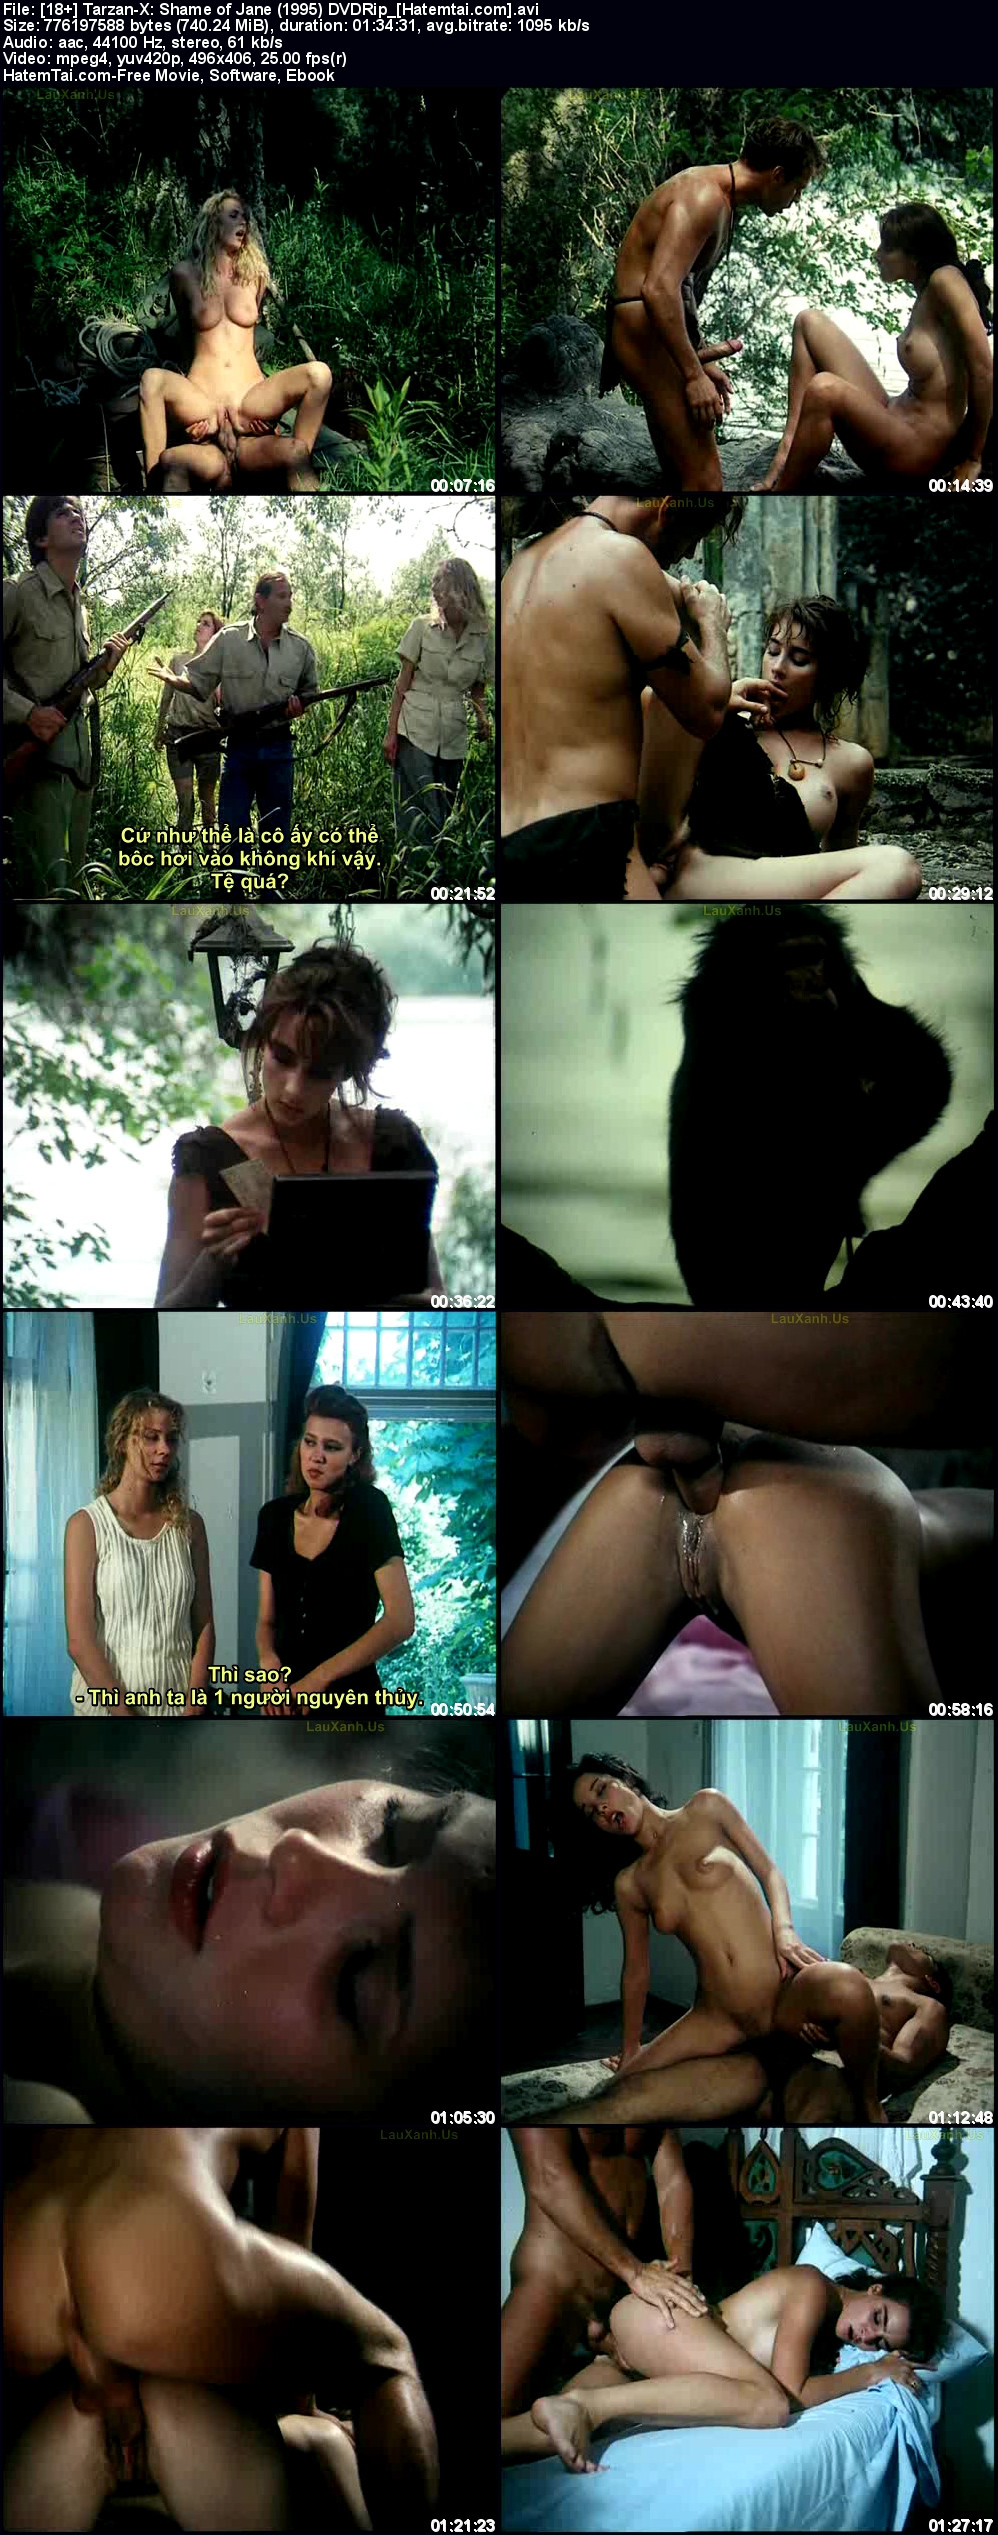 Shame Of Jaan In Hindi Cool Movie - tarzan shame of jane adult movie 2 - XXXPicz